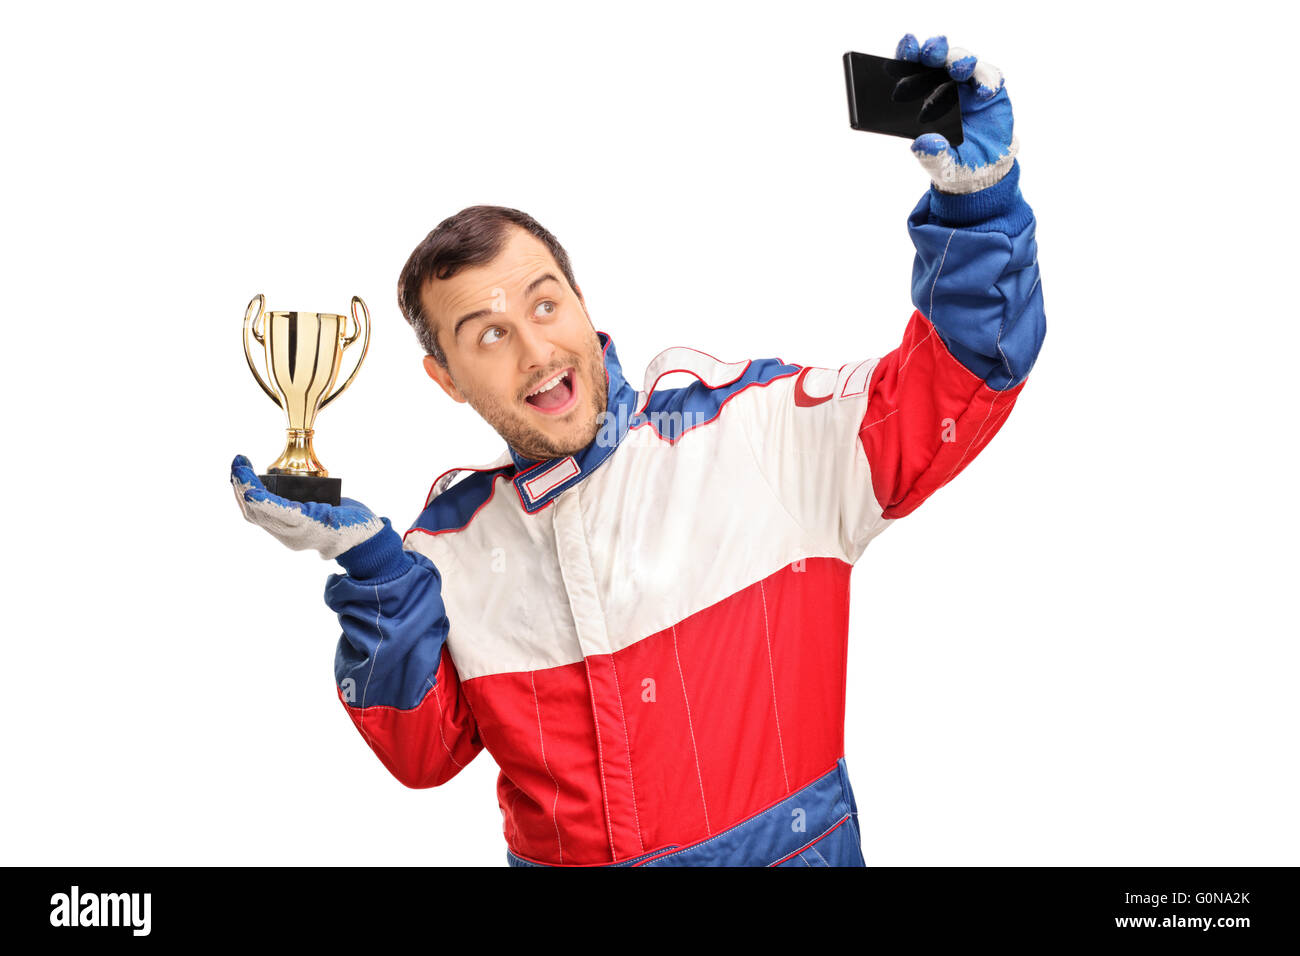 Joyful car racing champion holding a trophy and taking a selfie isolated on white background Stock Photo